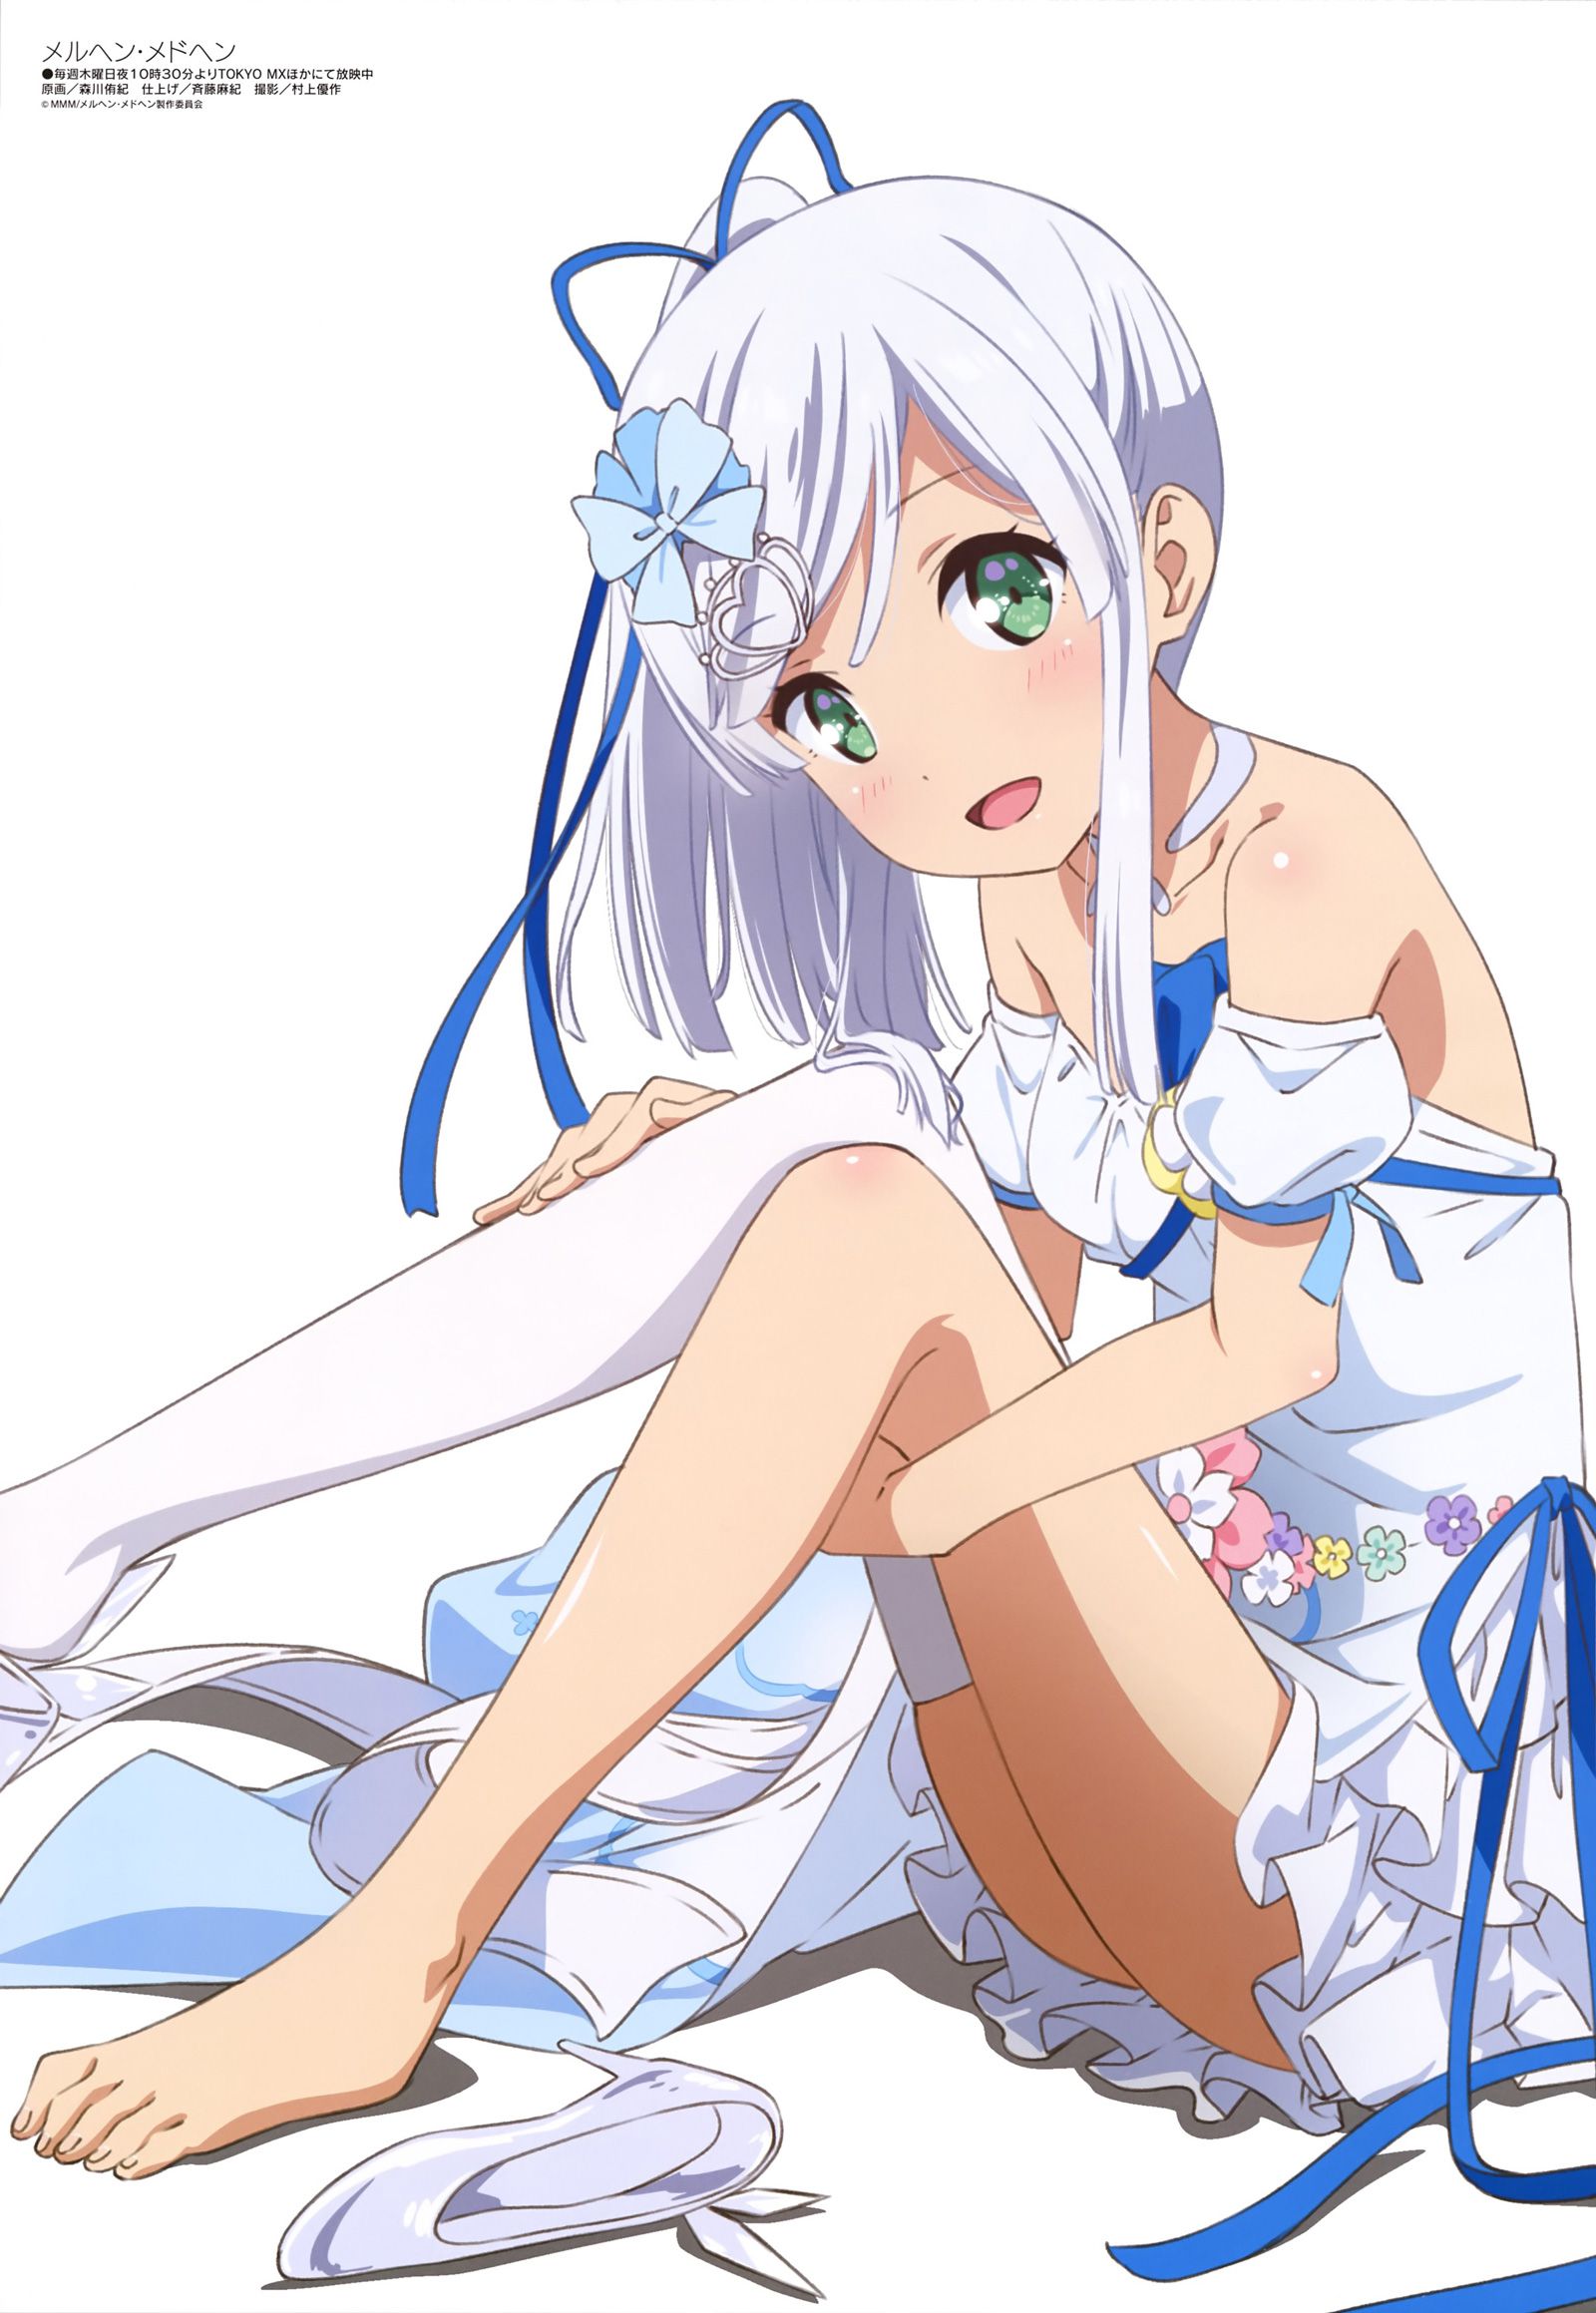 Secondary image of a silver-haired girl that 4 50 photos [Ero/non-erotic] 17